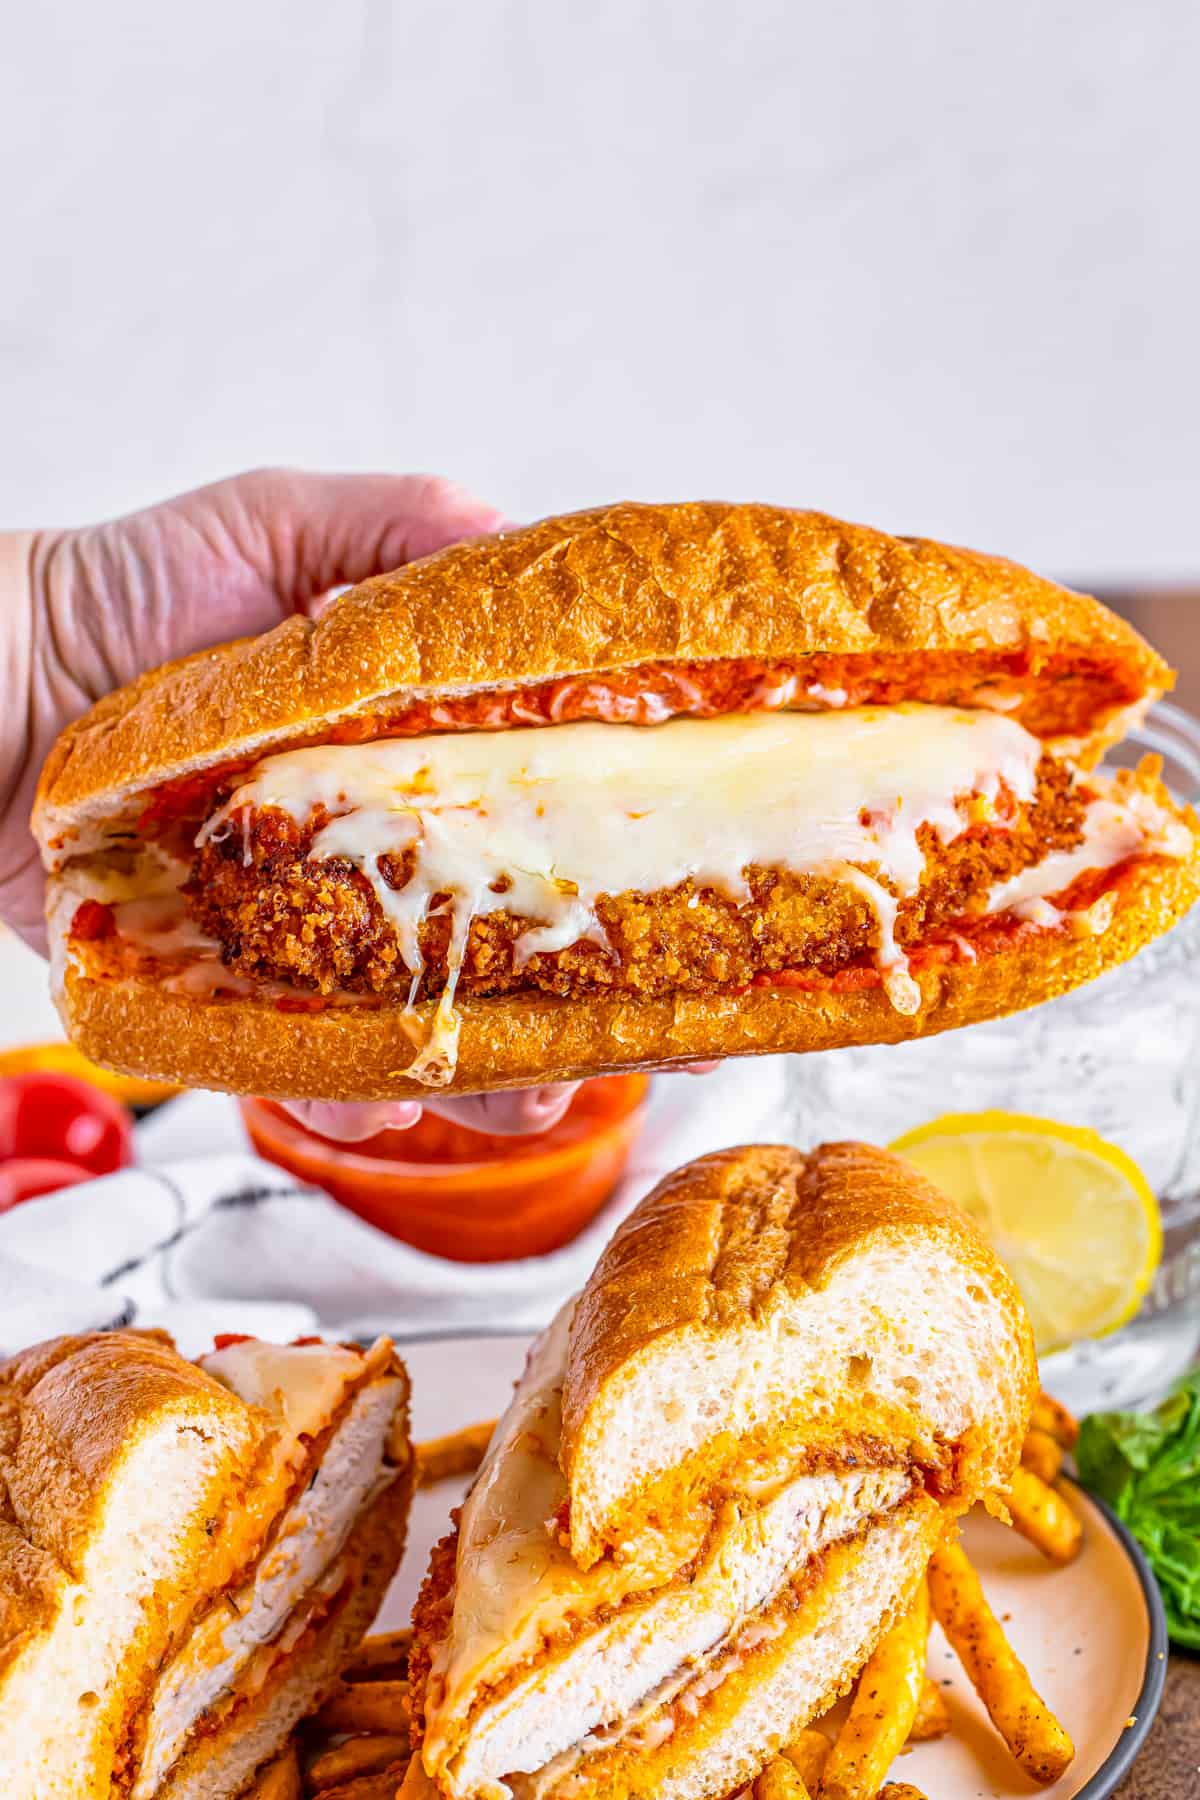 Hand holding up one of the Chicken Parmesan Sandwiches.